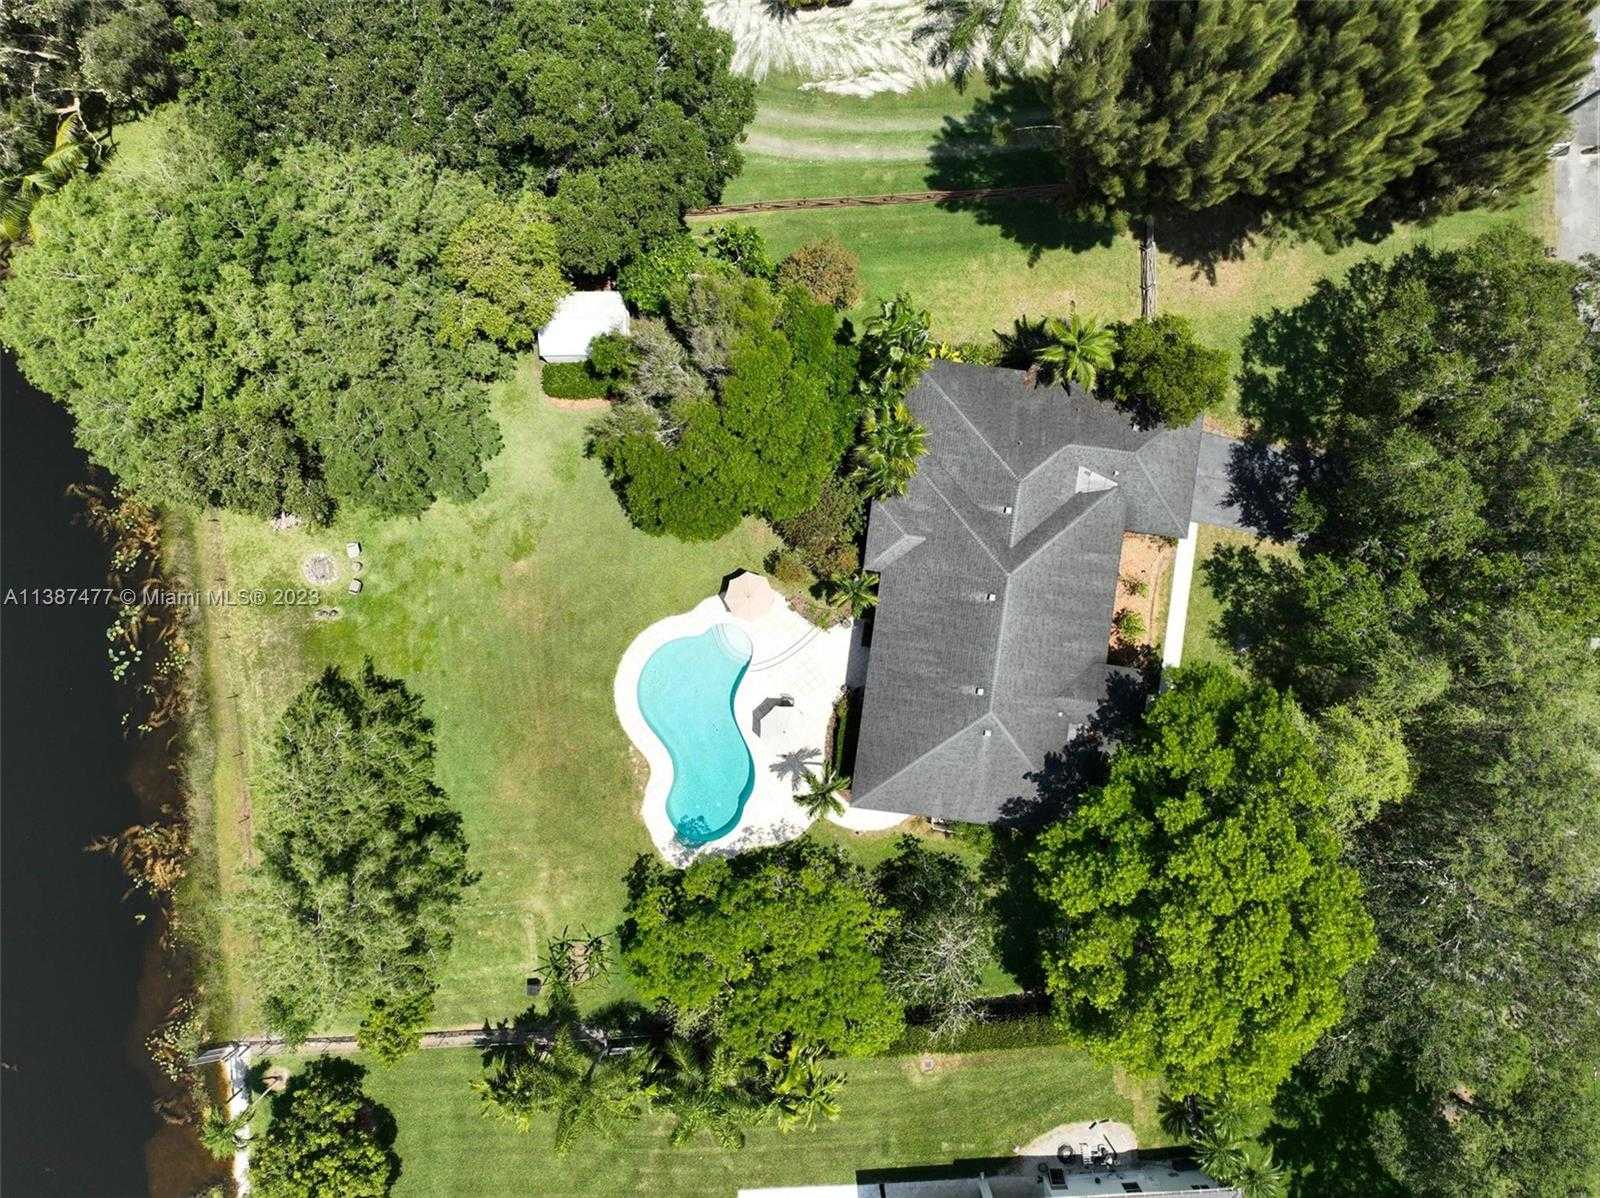 House in Southwest Ranches, Florida 11719034